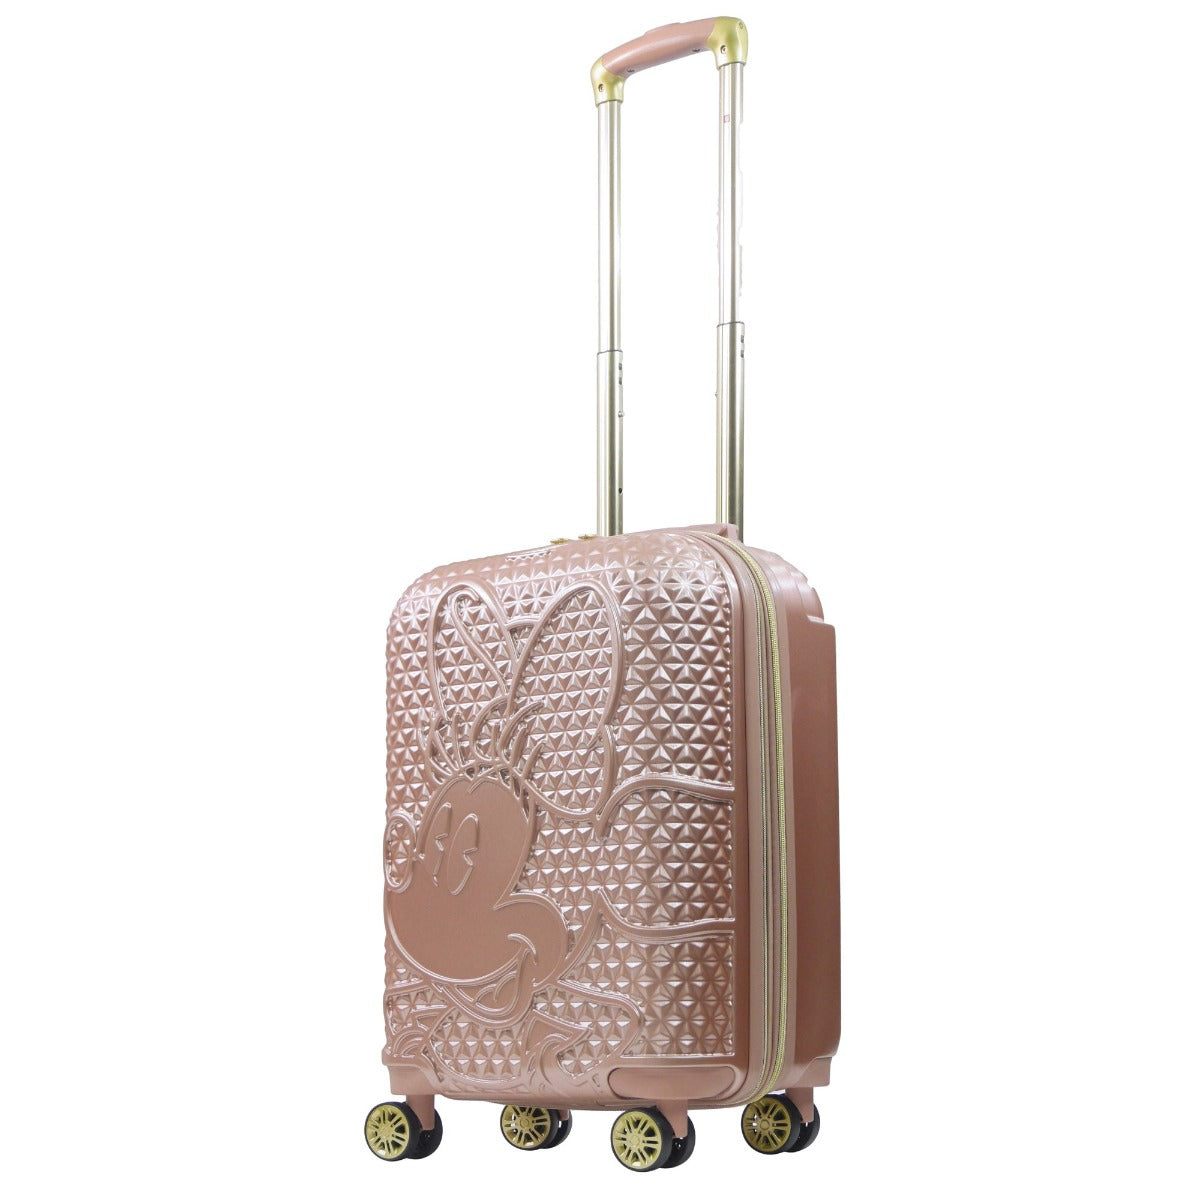 Rose gold Ful Disney Minnie Mouse textured 22.5 inch hardside spinner suitcase with 2 id tags - best carry-on luggage